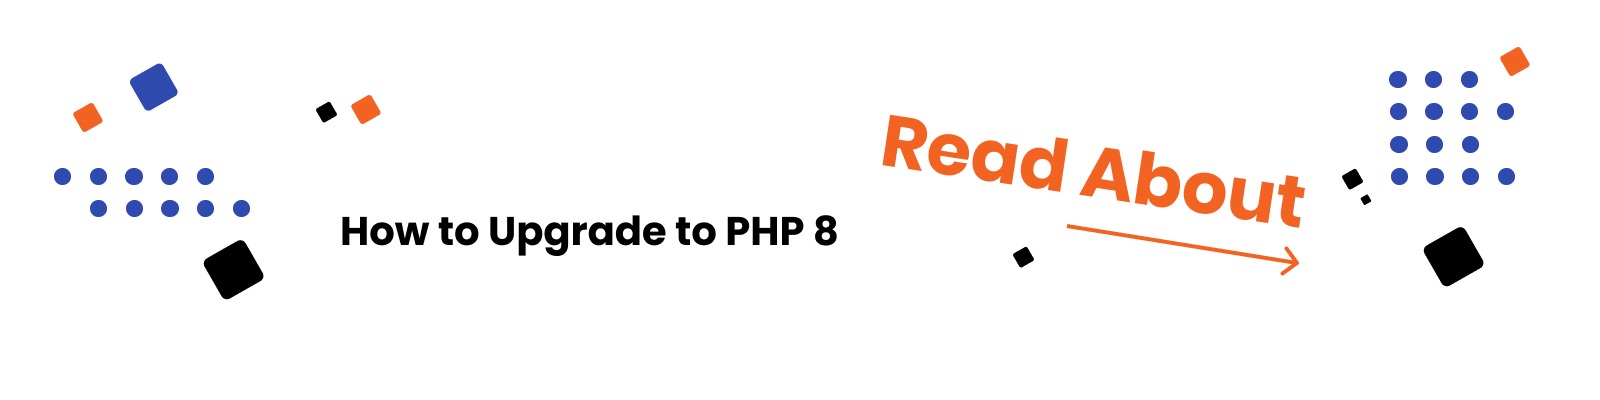 Upgrade to PHP 8: Why It’s Crucial to Keep Your eCommerce Website Updated